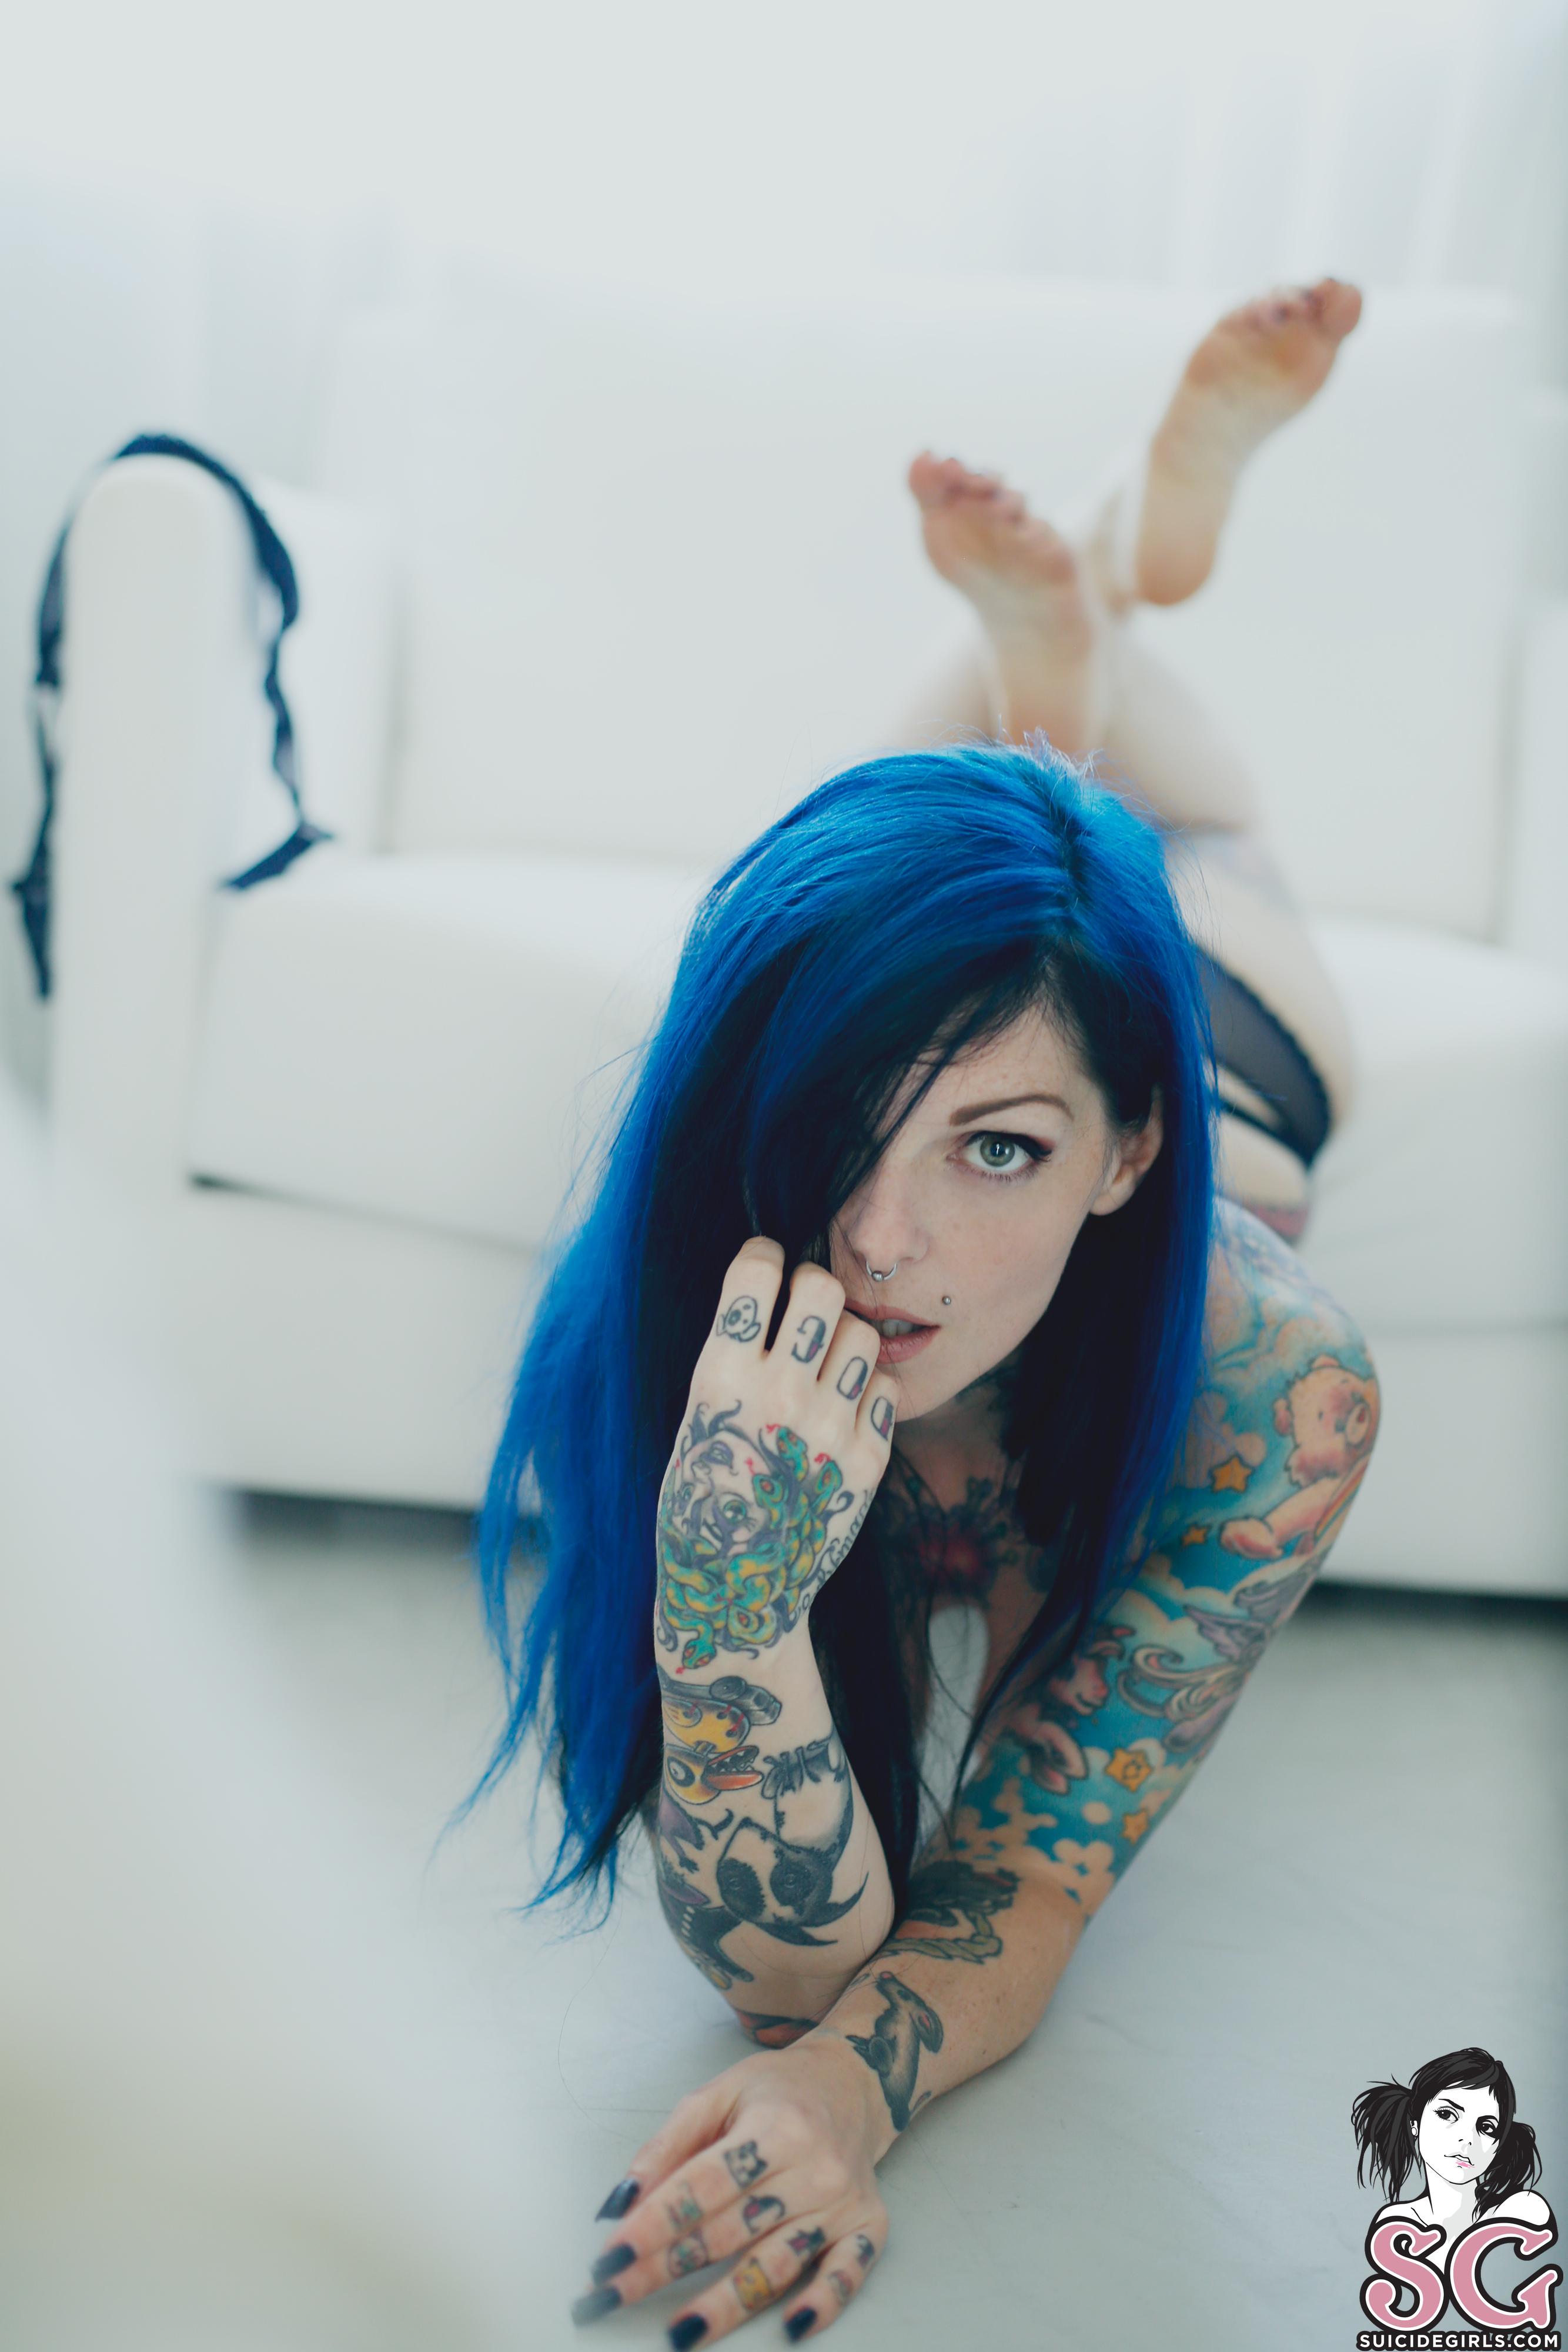 vyne suicide girl telegraph